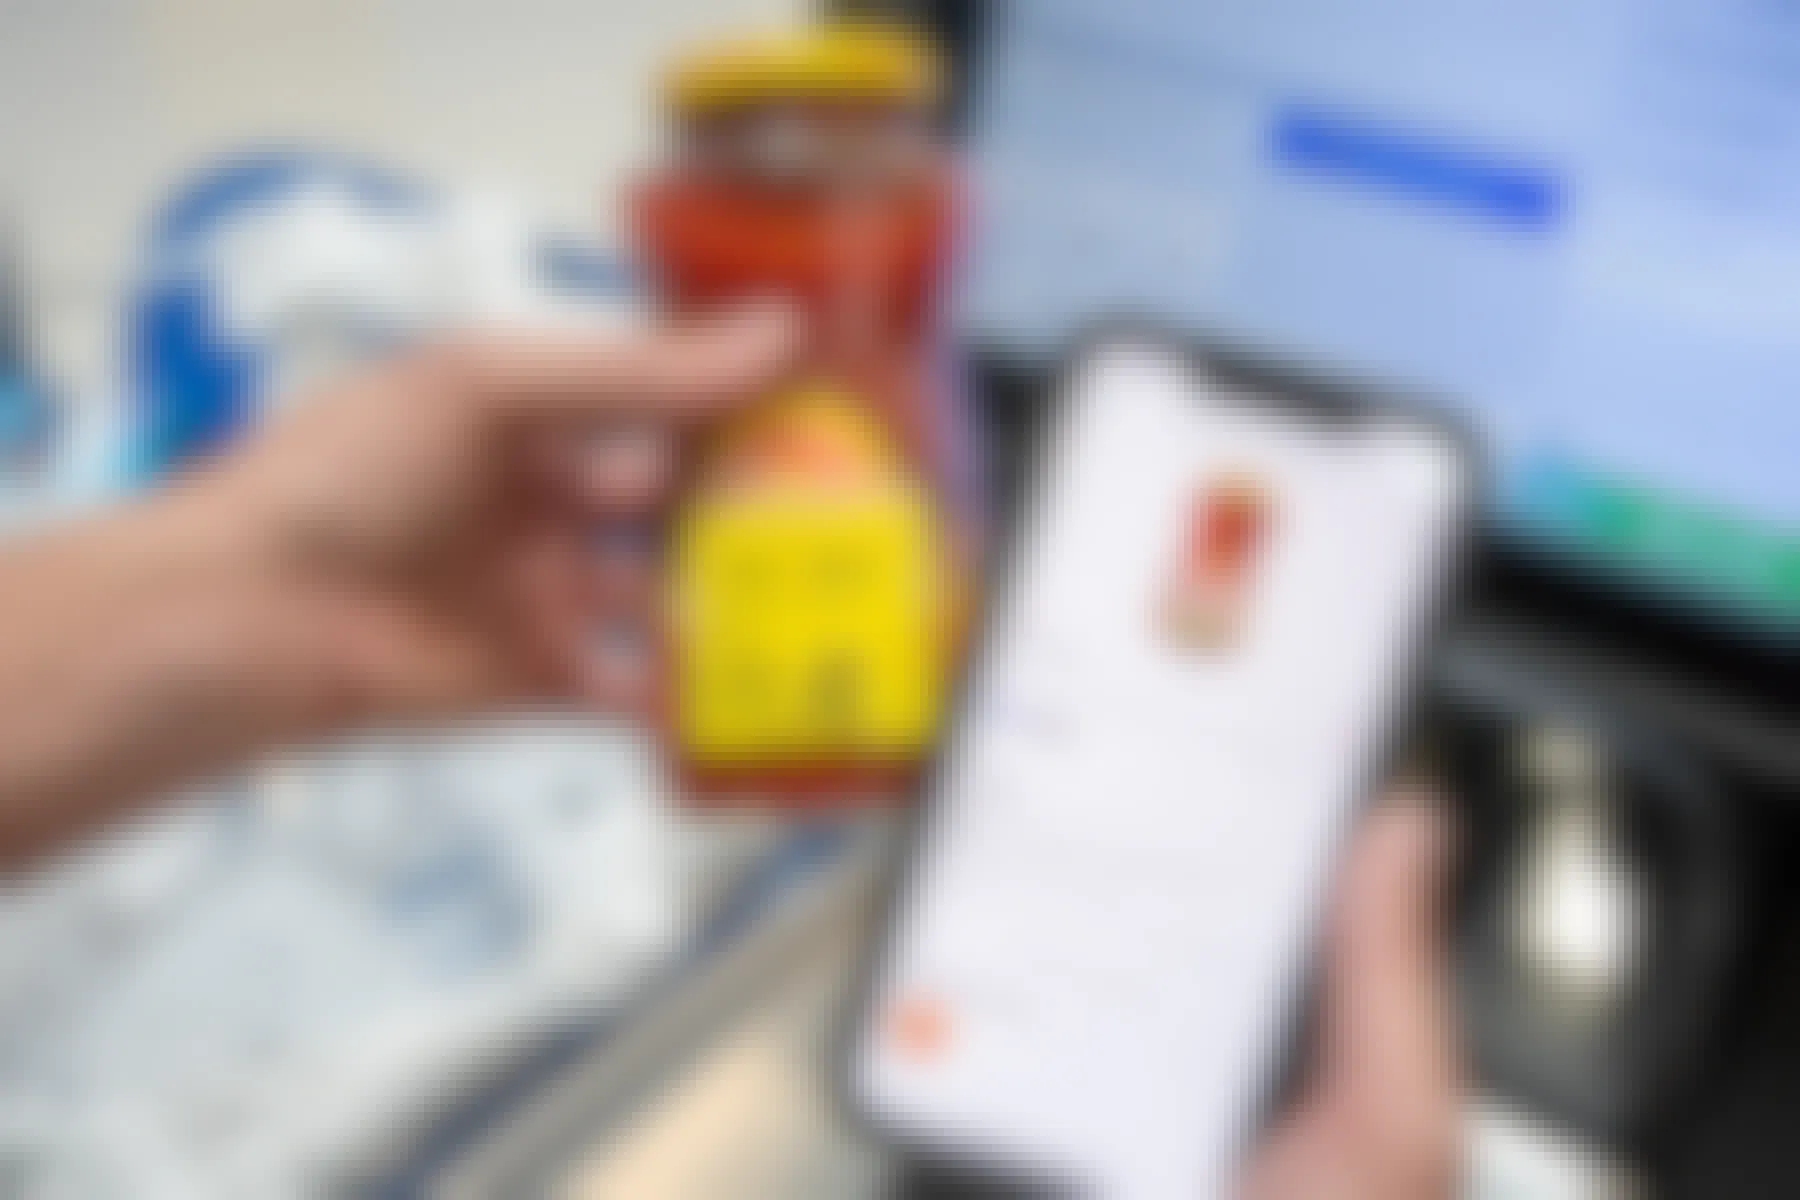 A person's hands, one holding a jar of Pace Medium Picante Salsa with a sticker showing the price as $1.48, and the other hand is holding up an iPhone with a rebate mobile app open showing the same product qualifying for $0.25 back.